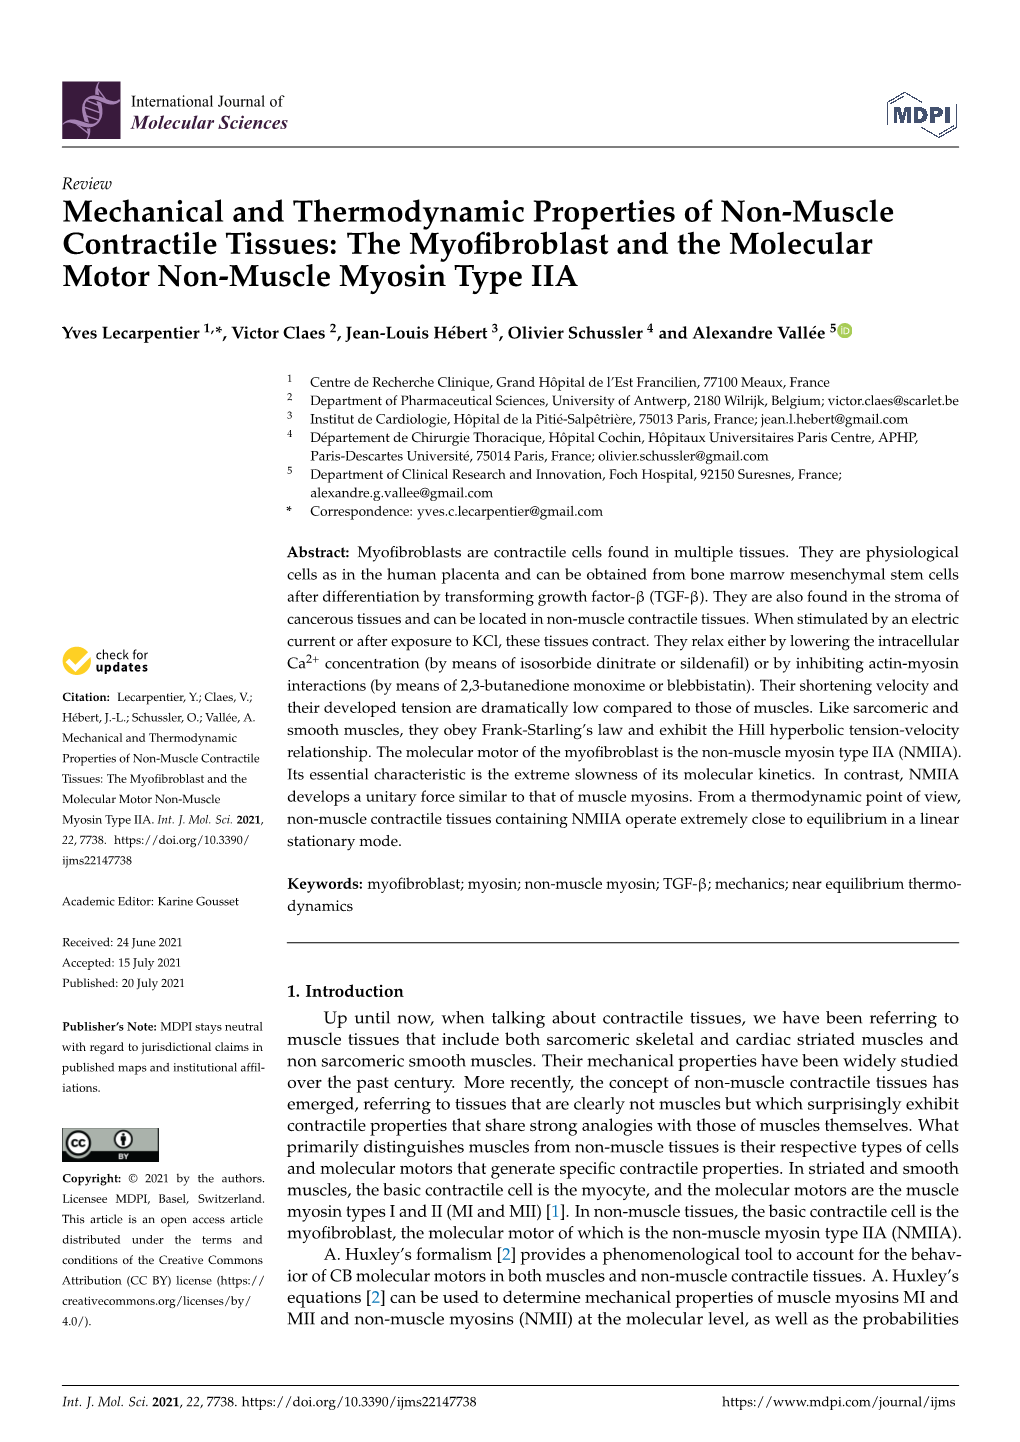 Mechanical and Thermodynamic Properties of Non-Muscle Contractile Tissues: the Myoﬁbroblast and the Molecular Motor Non-Muscle Myosin Type IIA